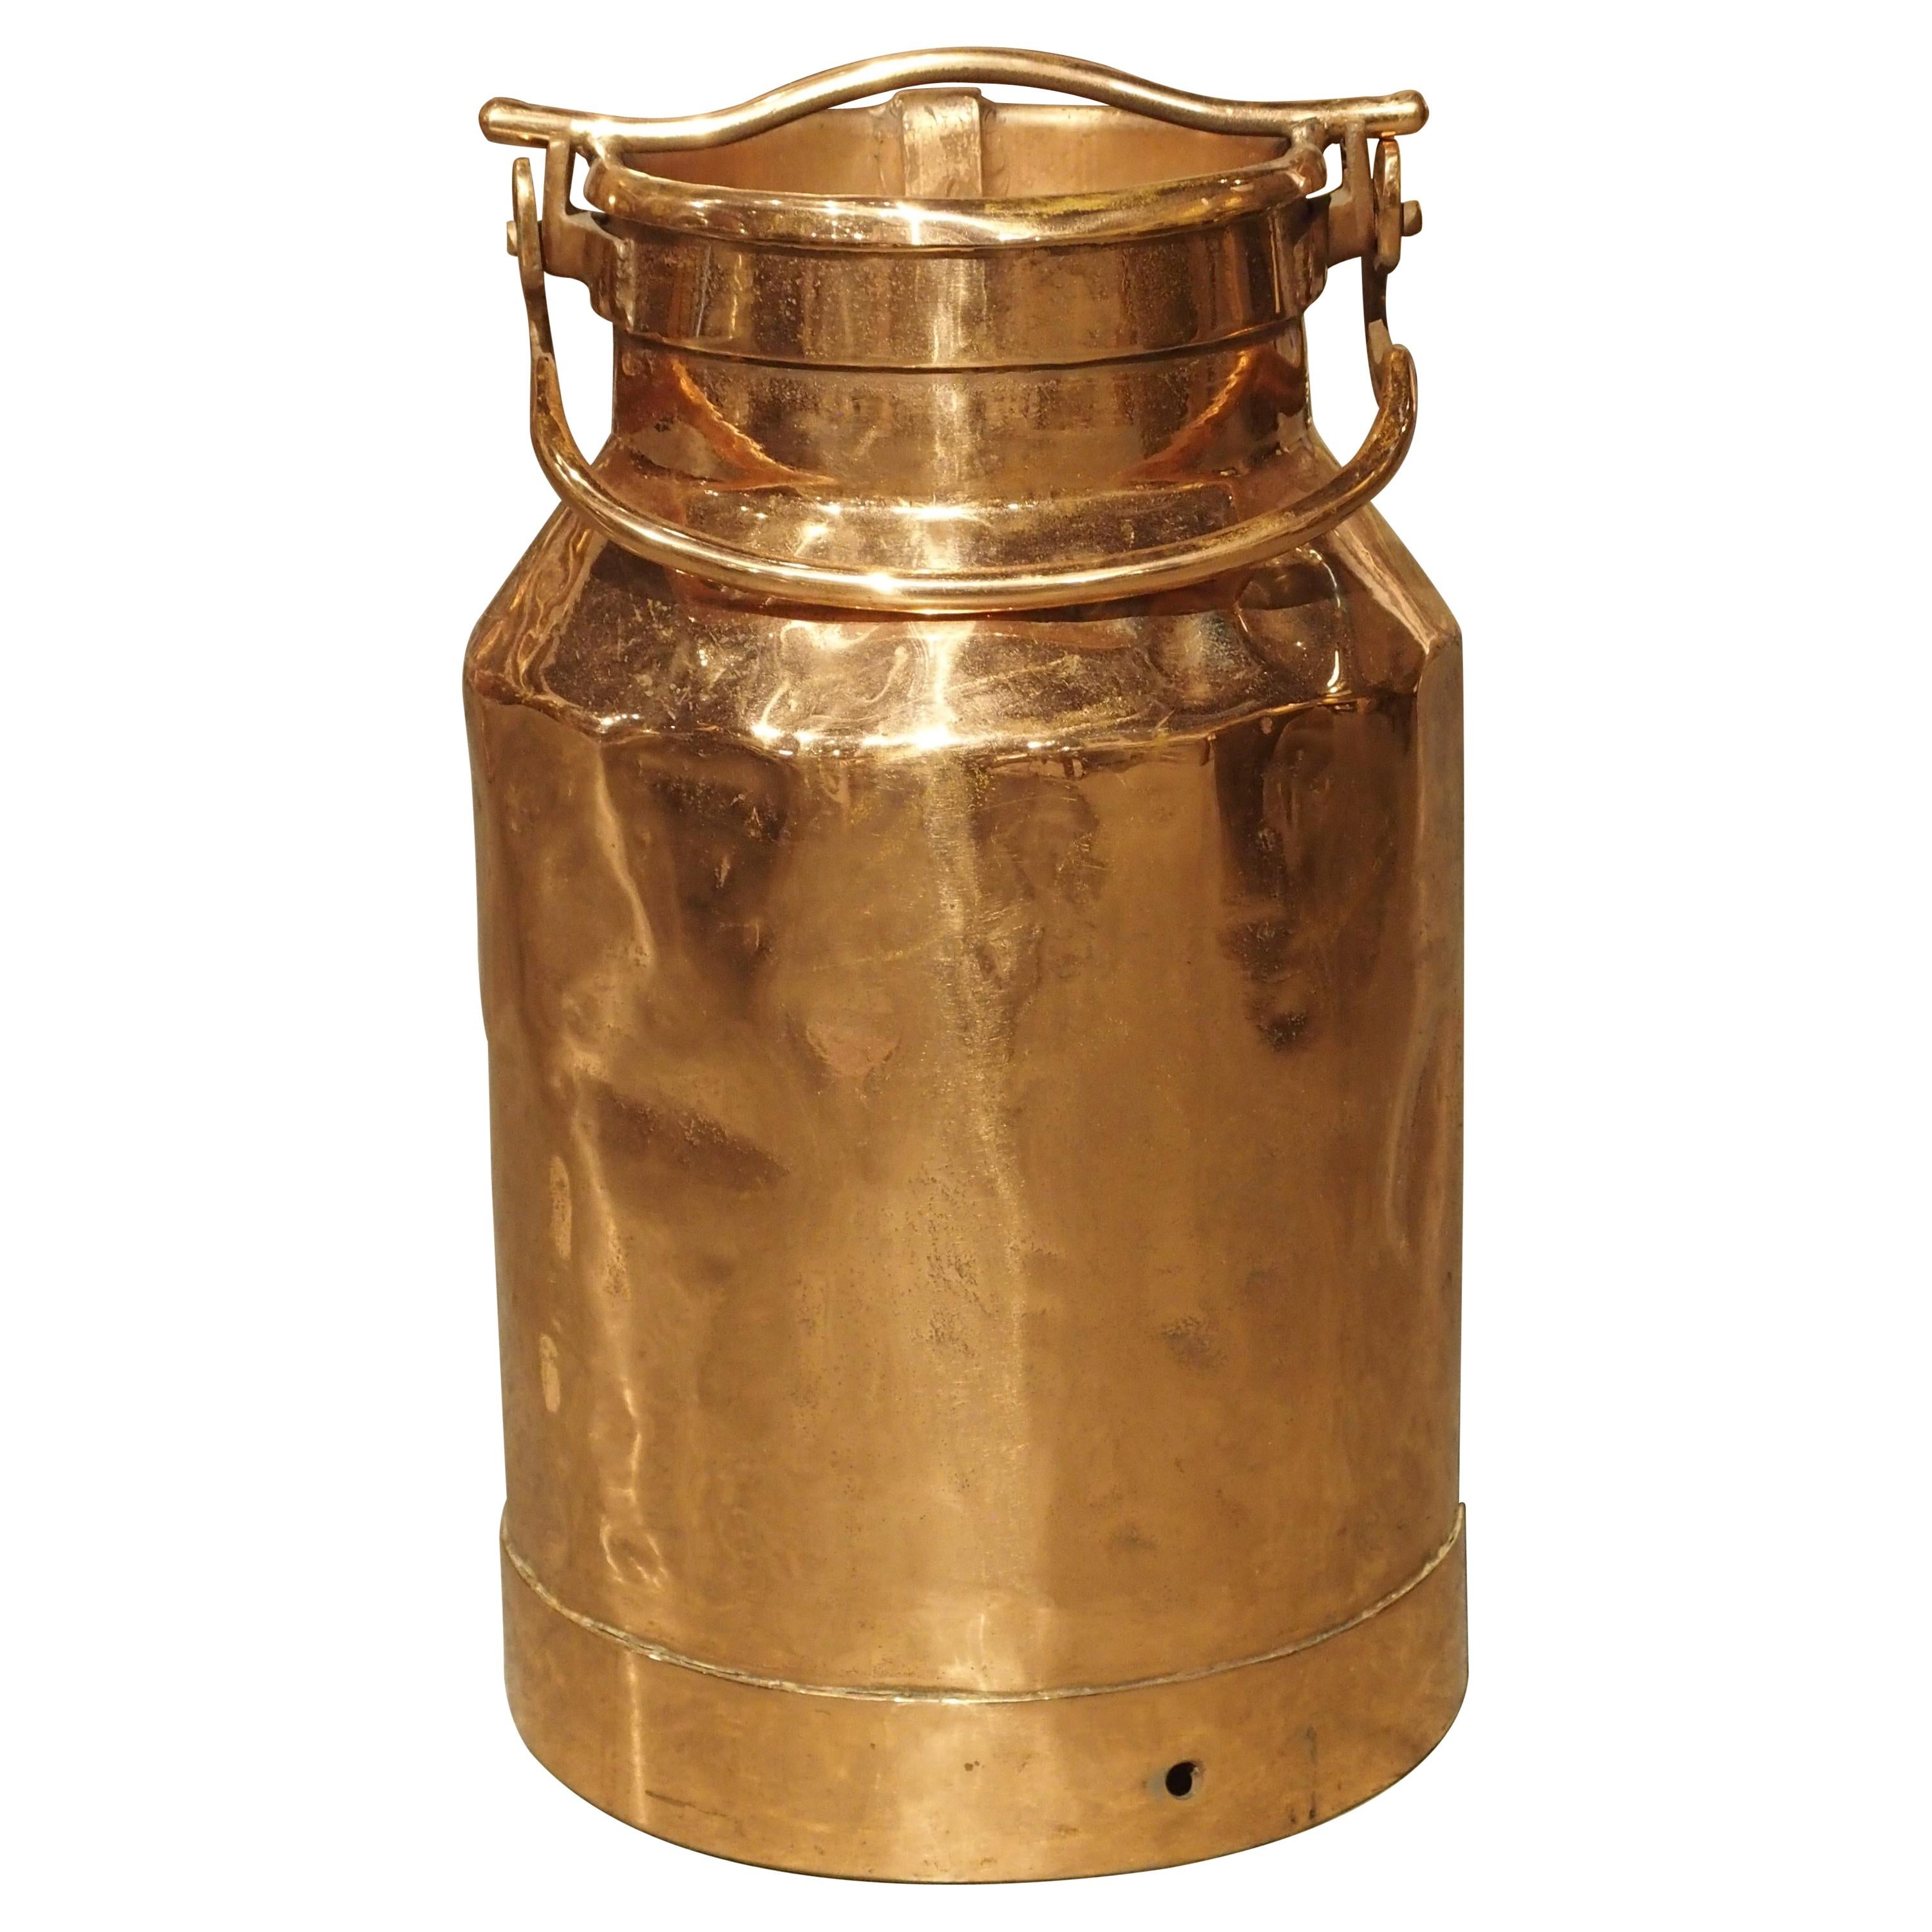 Antique French Polished Copper Milk Container, Late 19th Century